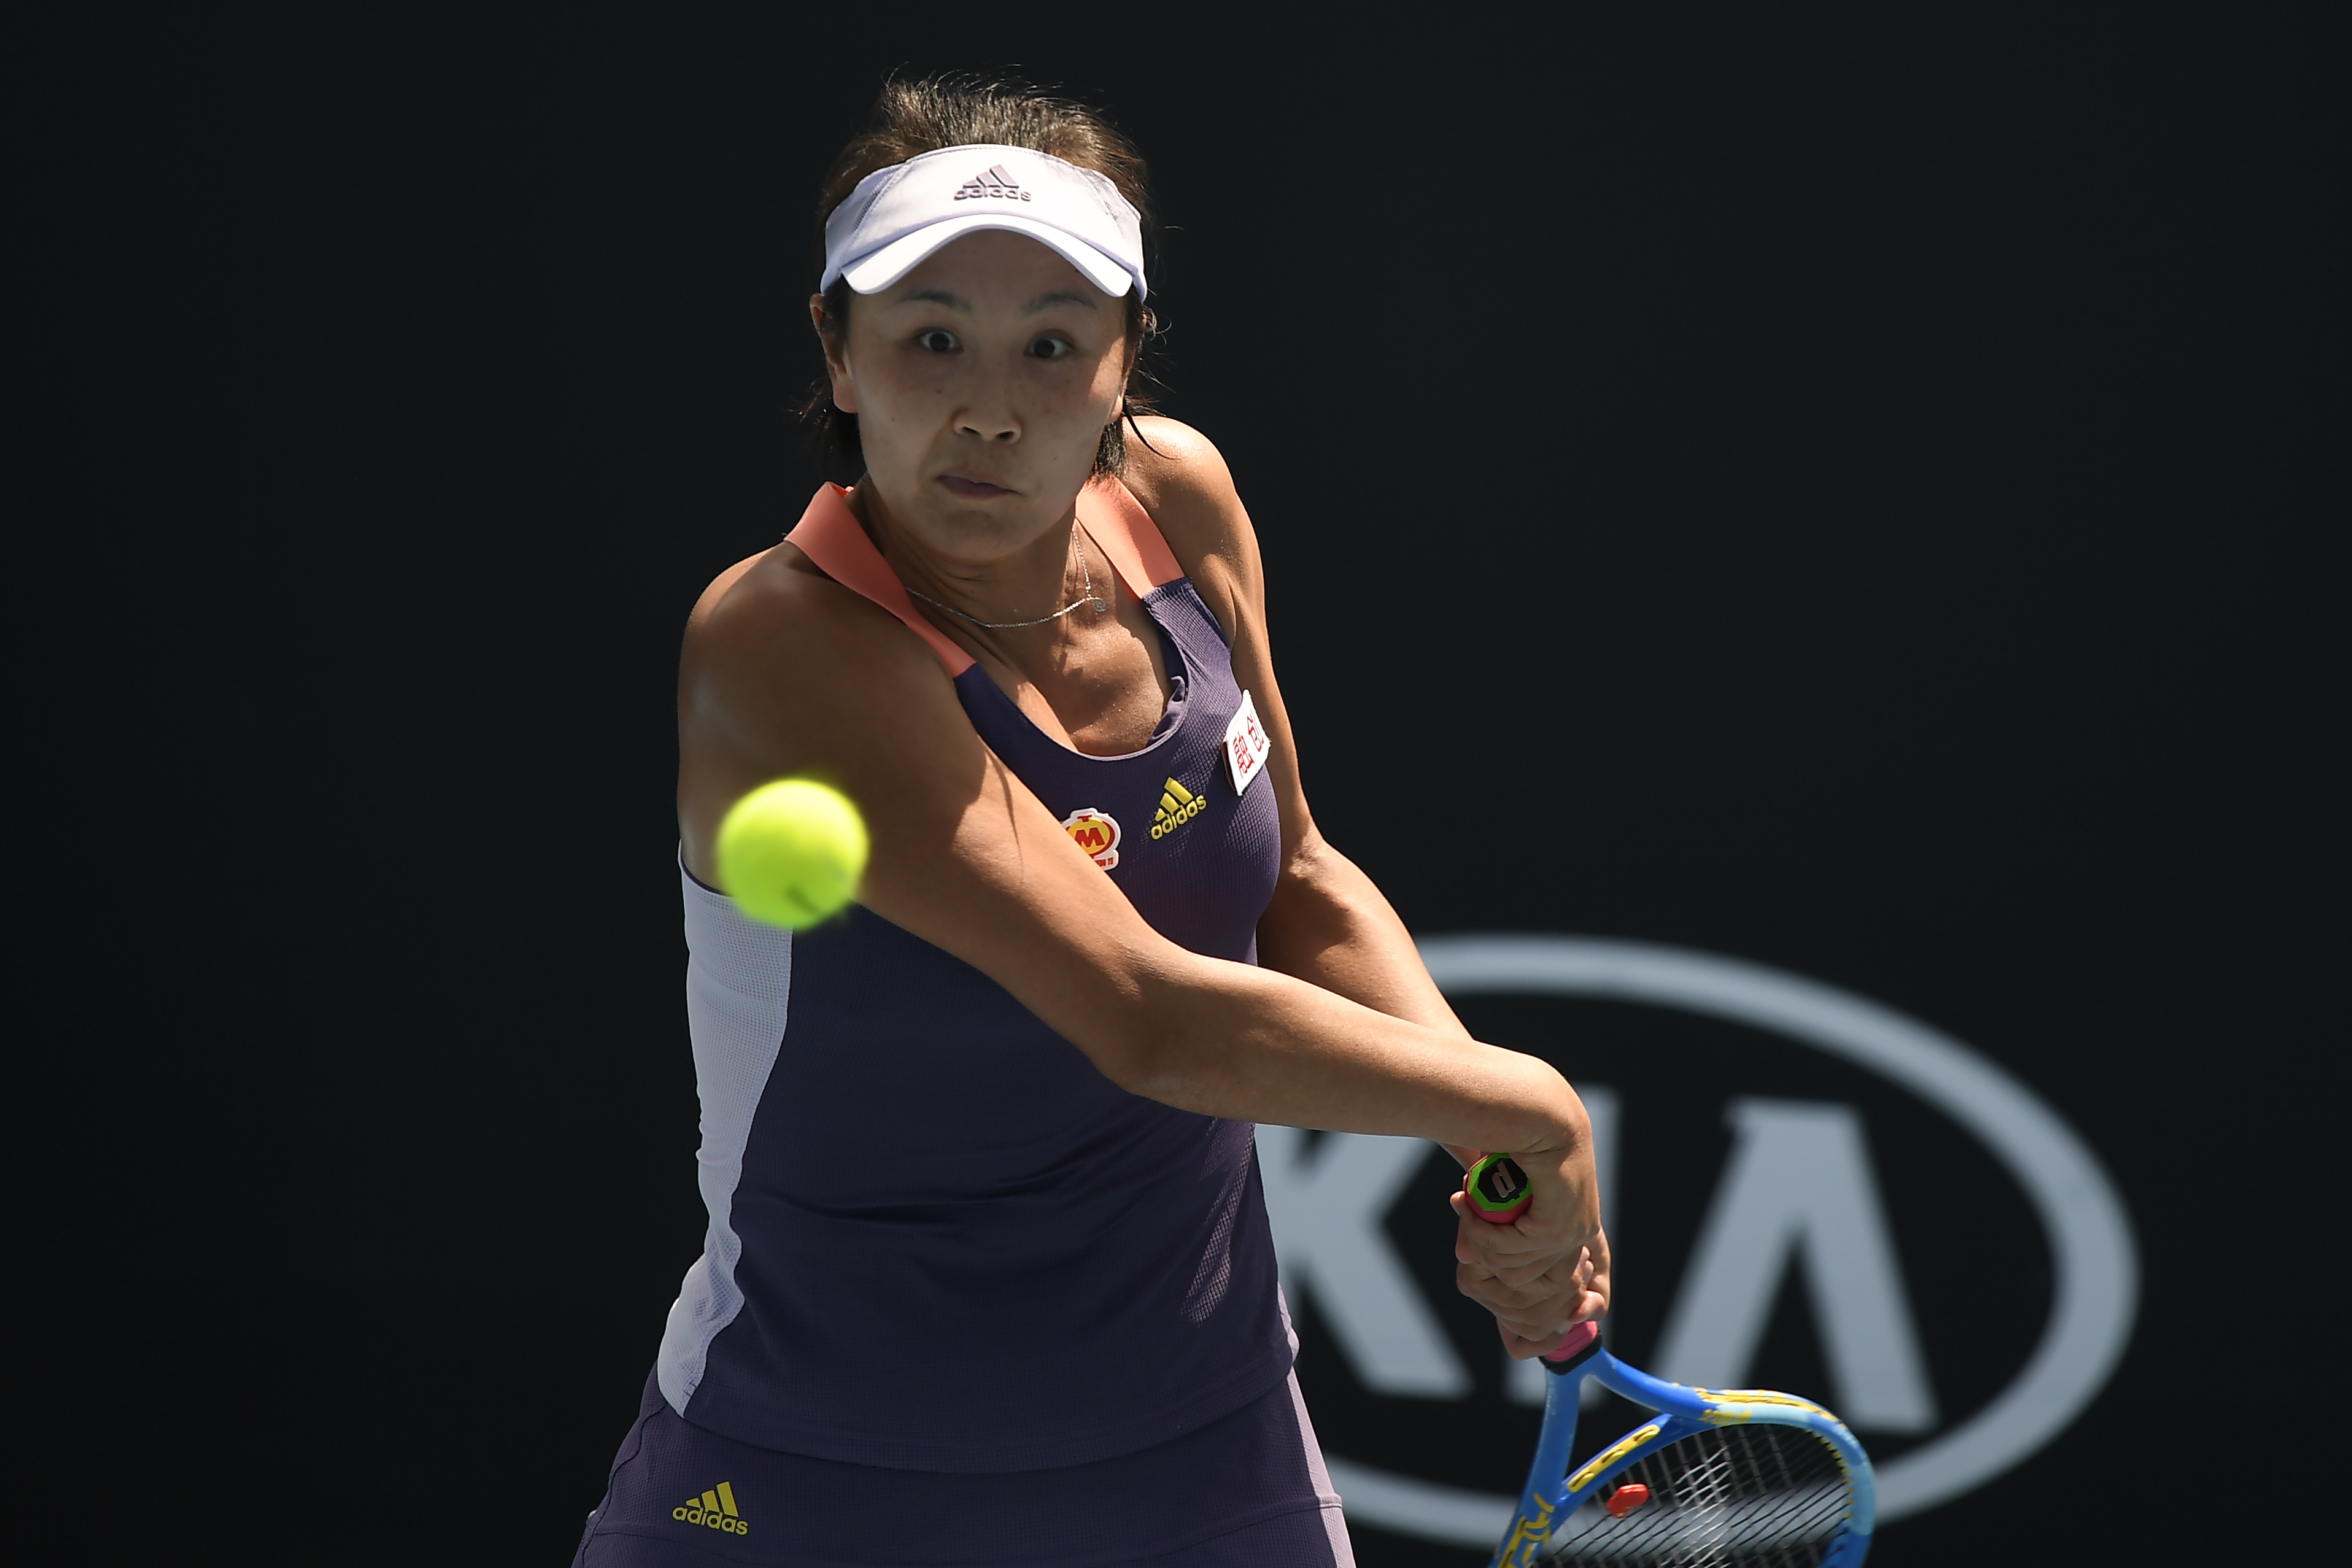 Shuai Peng of China in action during her Women's Singles first round match against Nao Hibino of Japan on day two of the 2020 Australian Open at Melbourne Park on January 21, 2020 in Melbourne, Australia. (Getty Images&mdash;2020 Fred Lee)